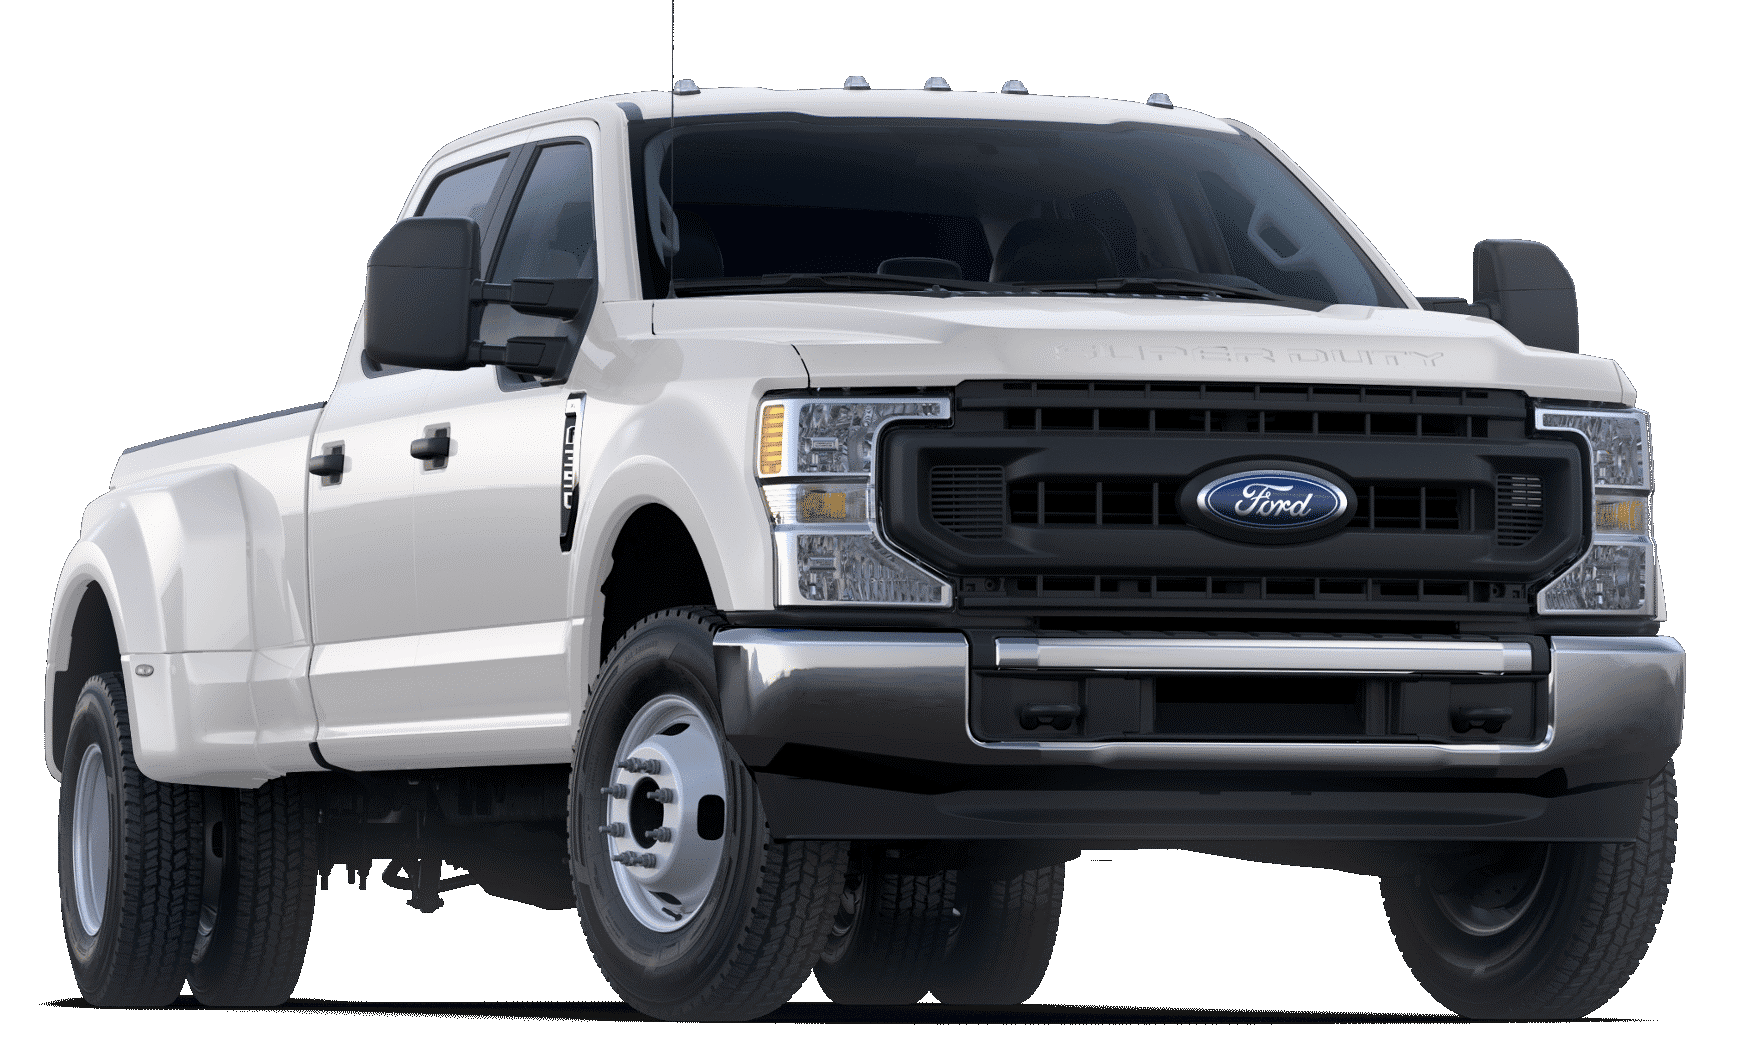 How to Start a Pickup Truck Business